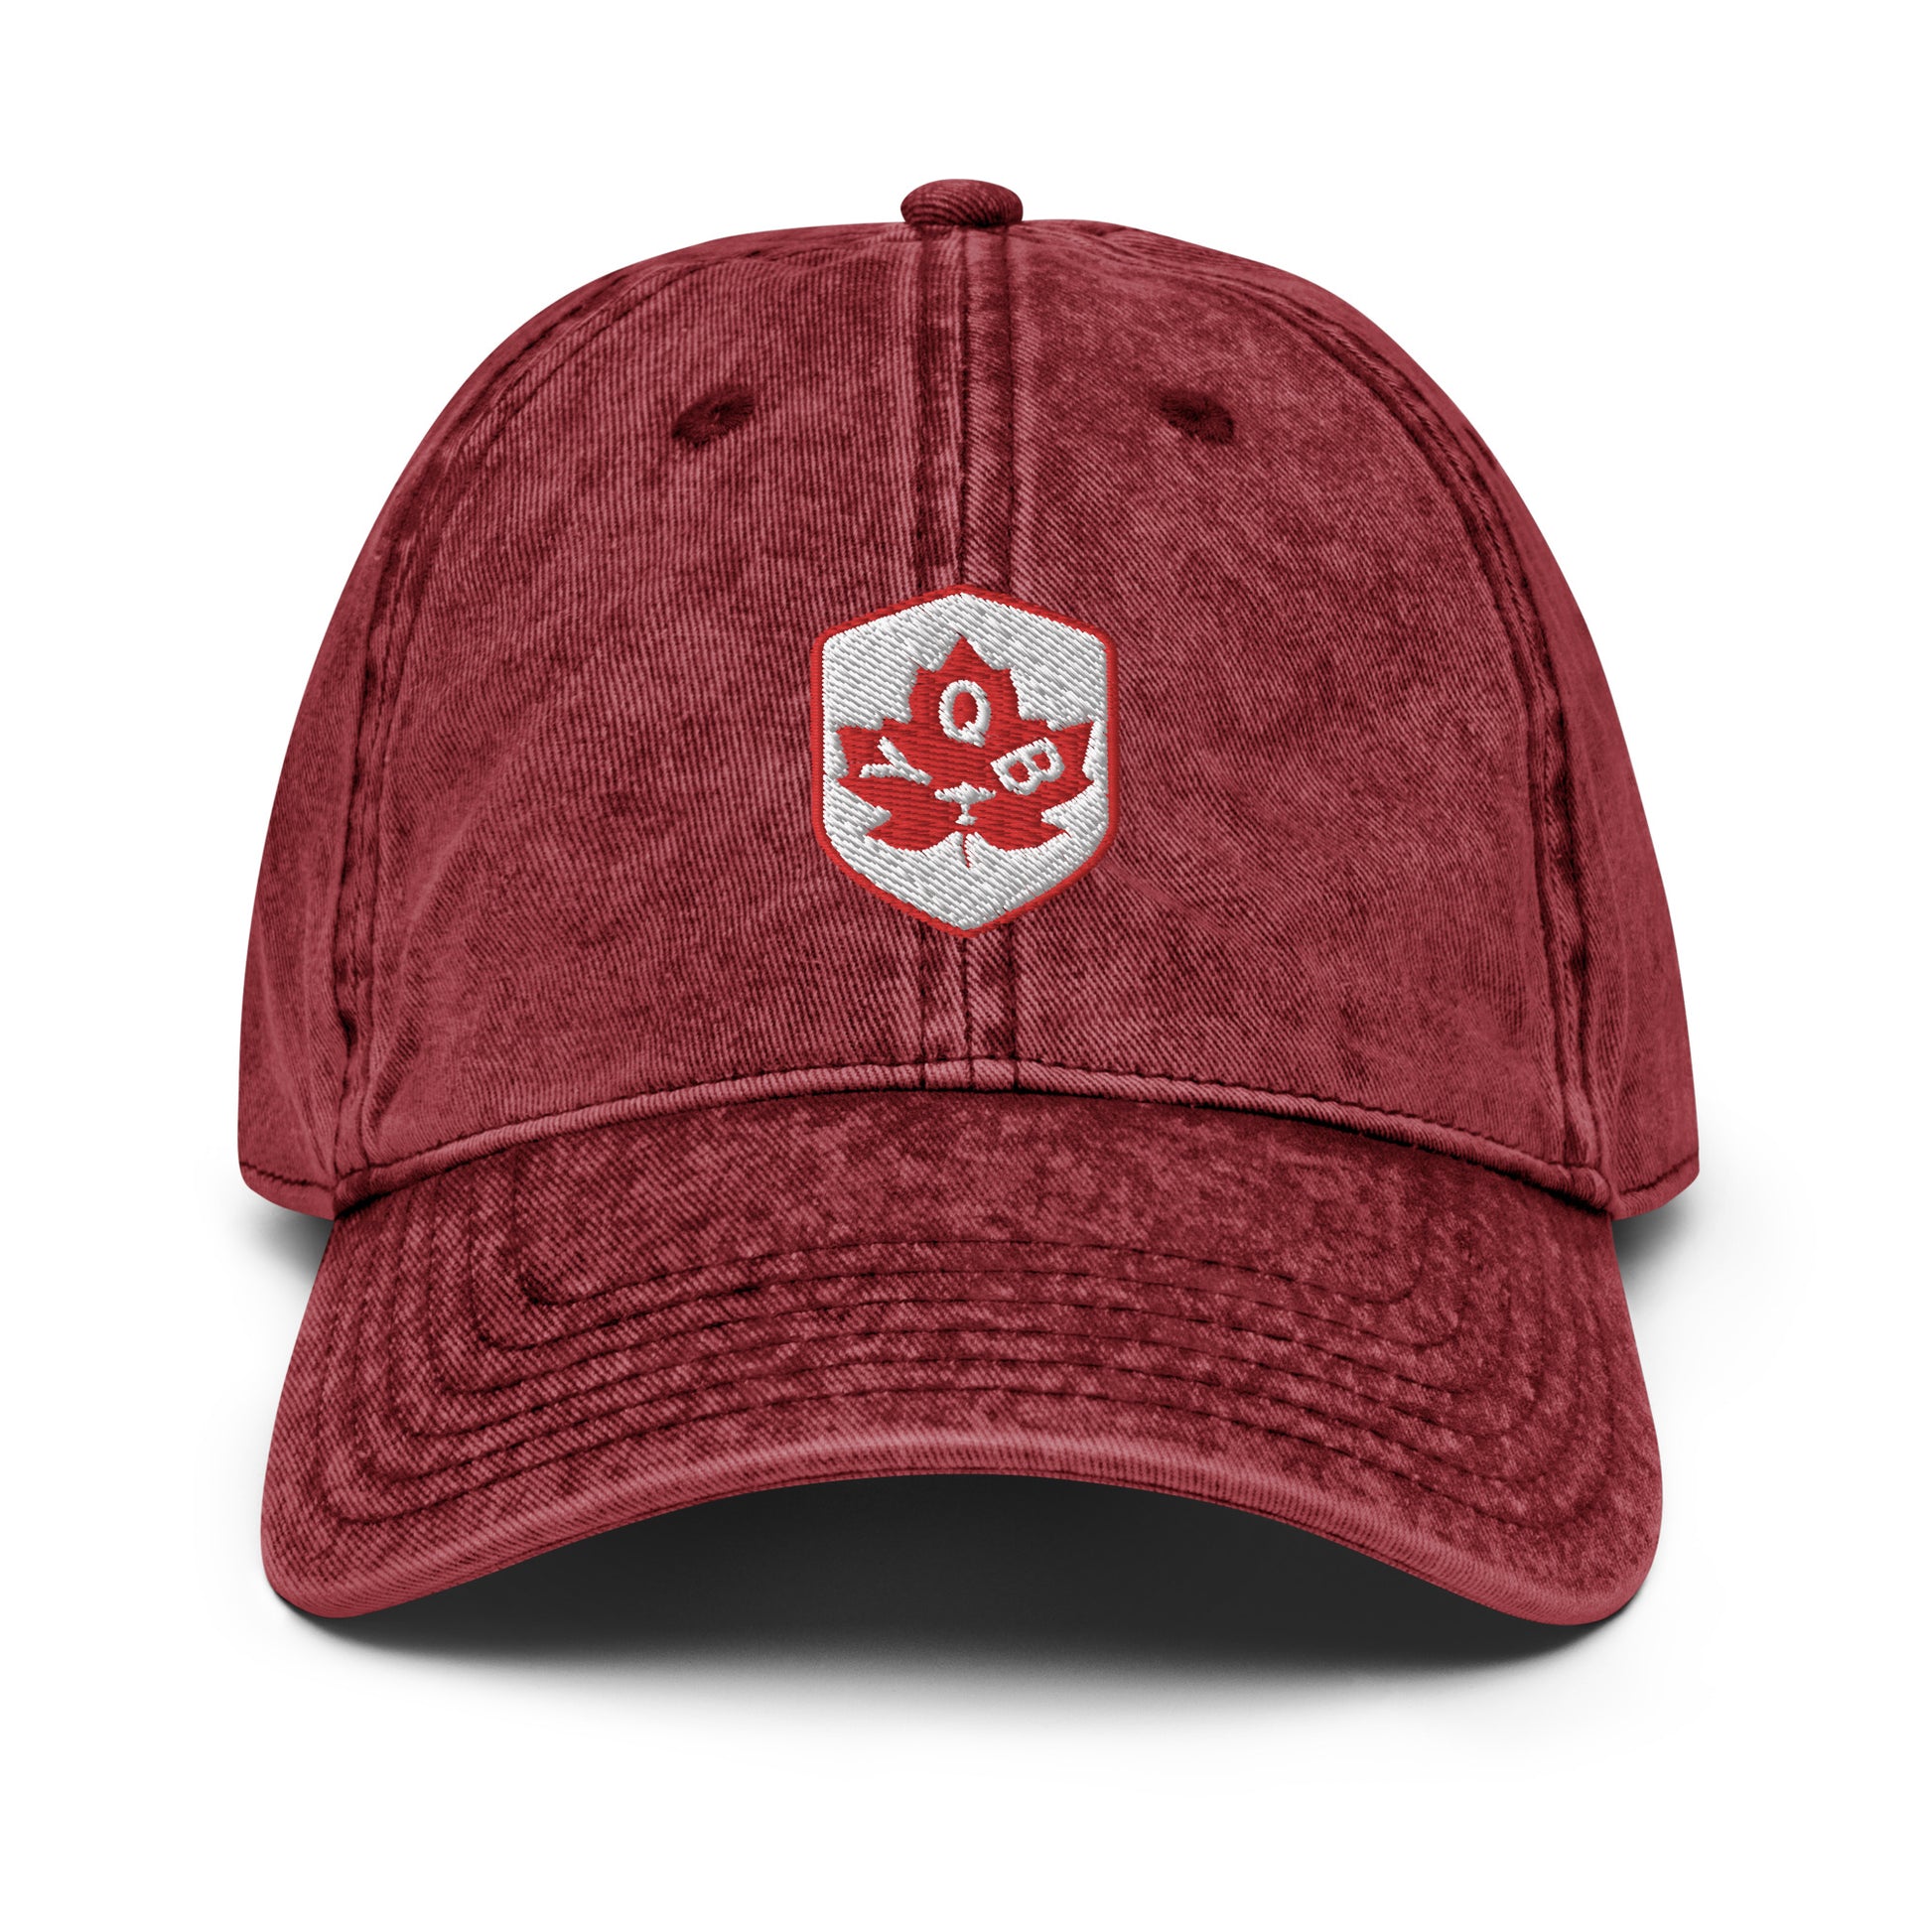 Maple Leaf Twill Cap - Red/White • YQB Quebec City • YHM Designs - Image 17